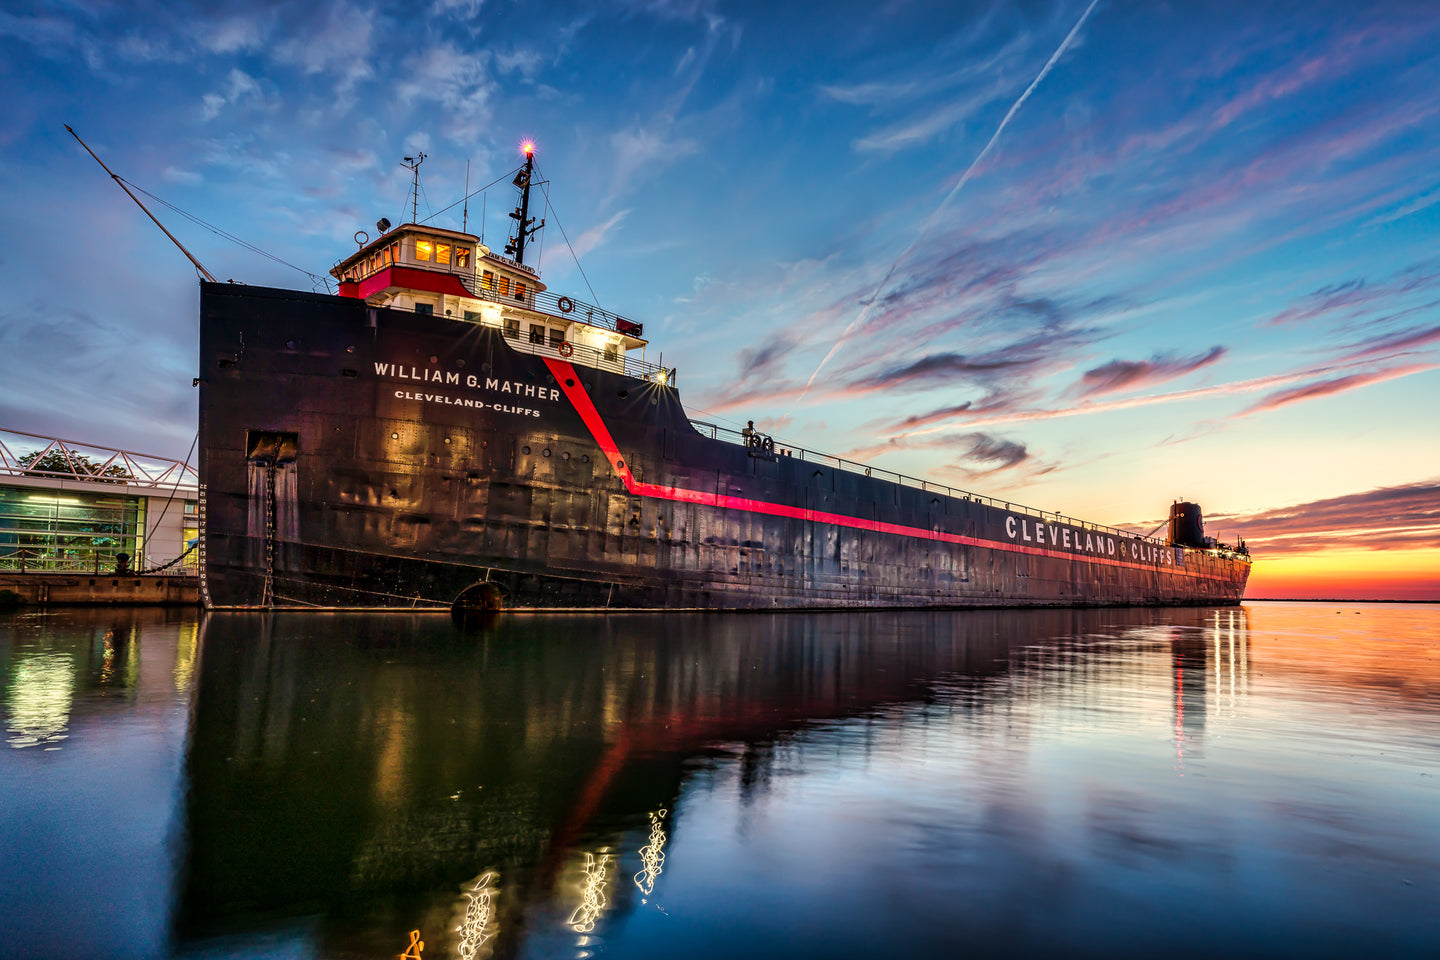 Steamship William G. Mather - Cleveland, OH